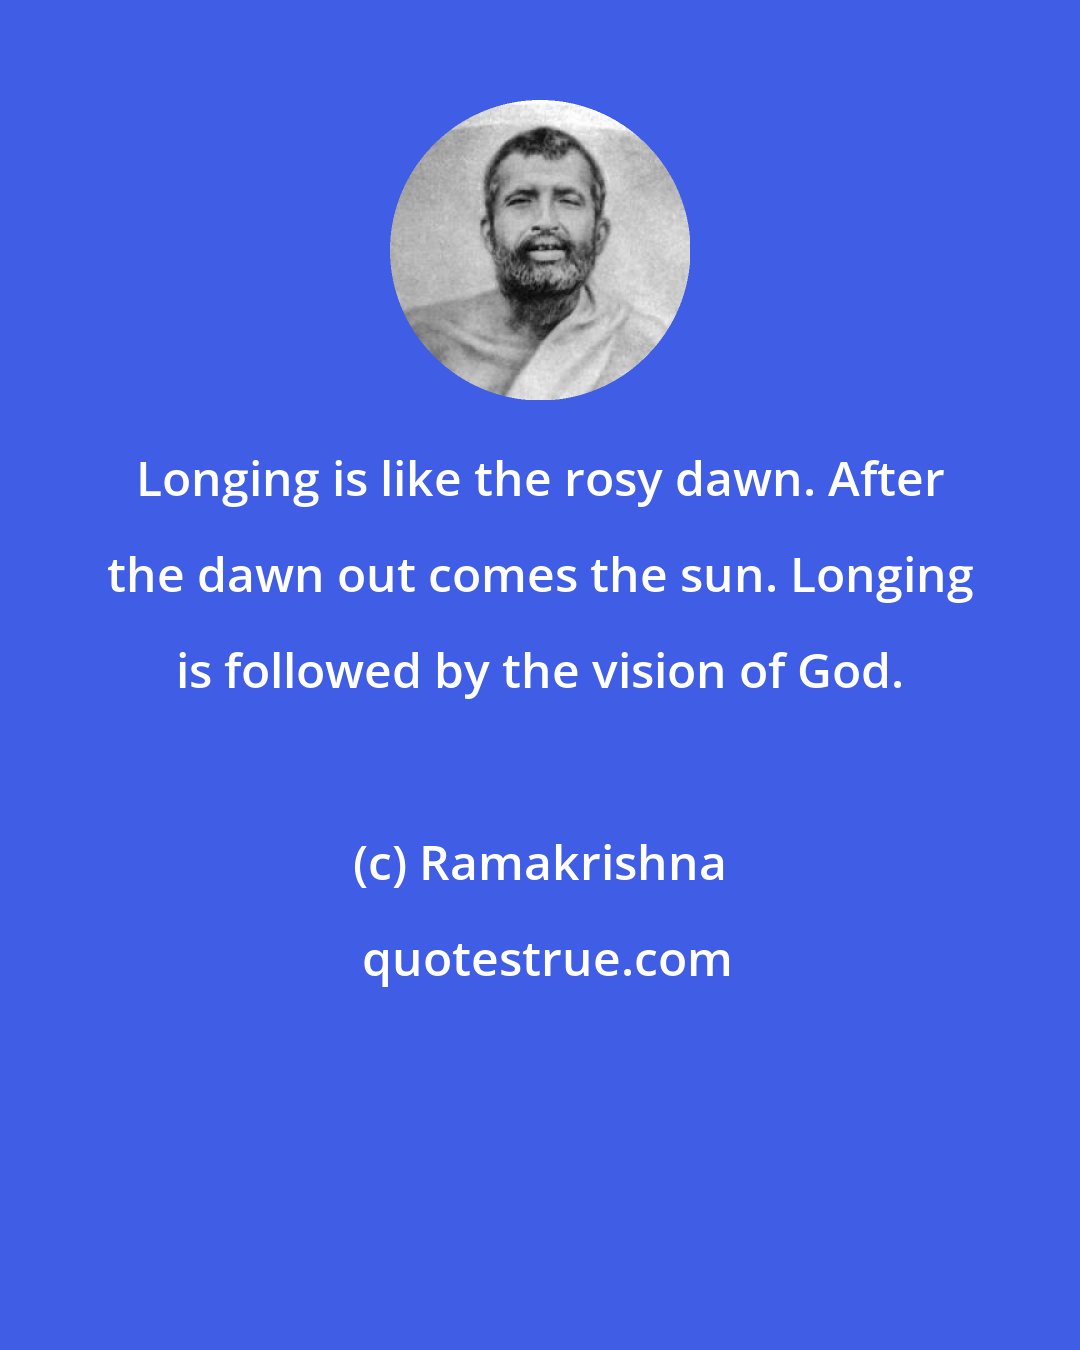 Ramakrishna: Longing is like the rosy dawn. After the dawn out comes the sun. Longing is followed by the vision of God.